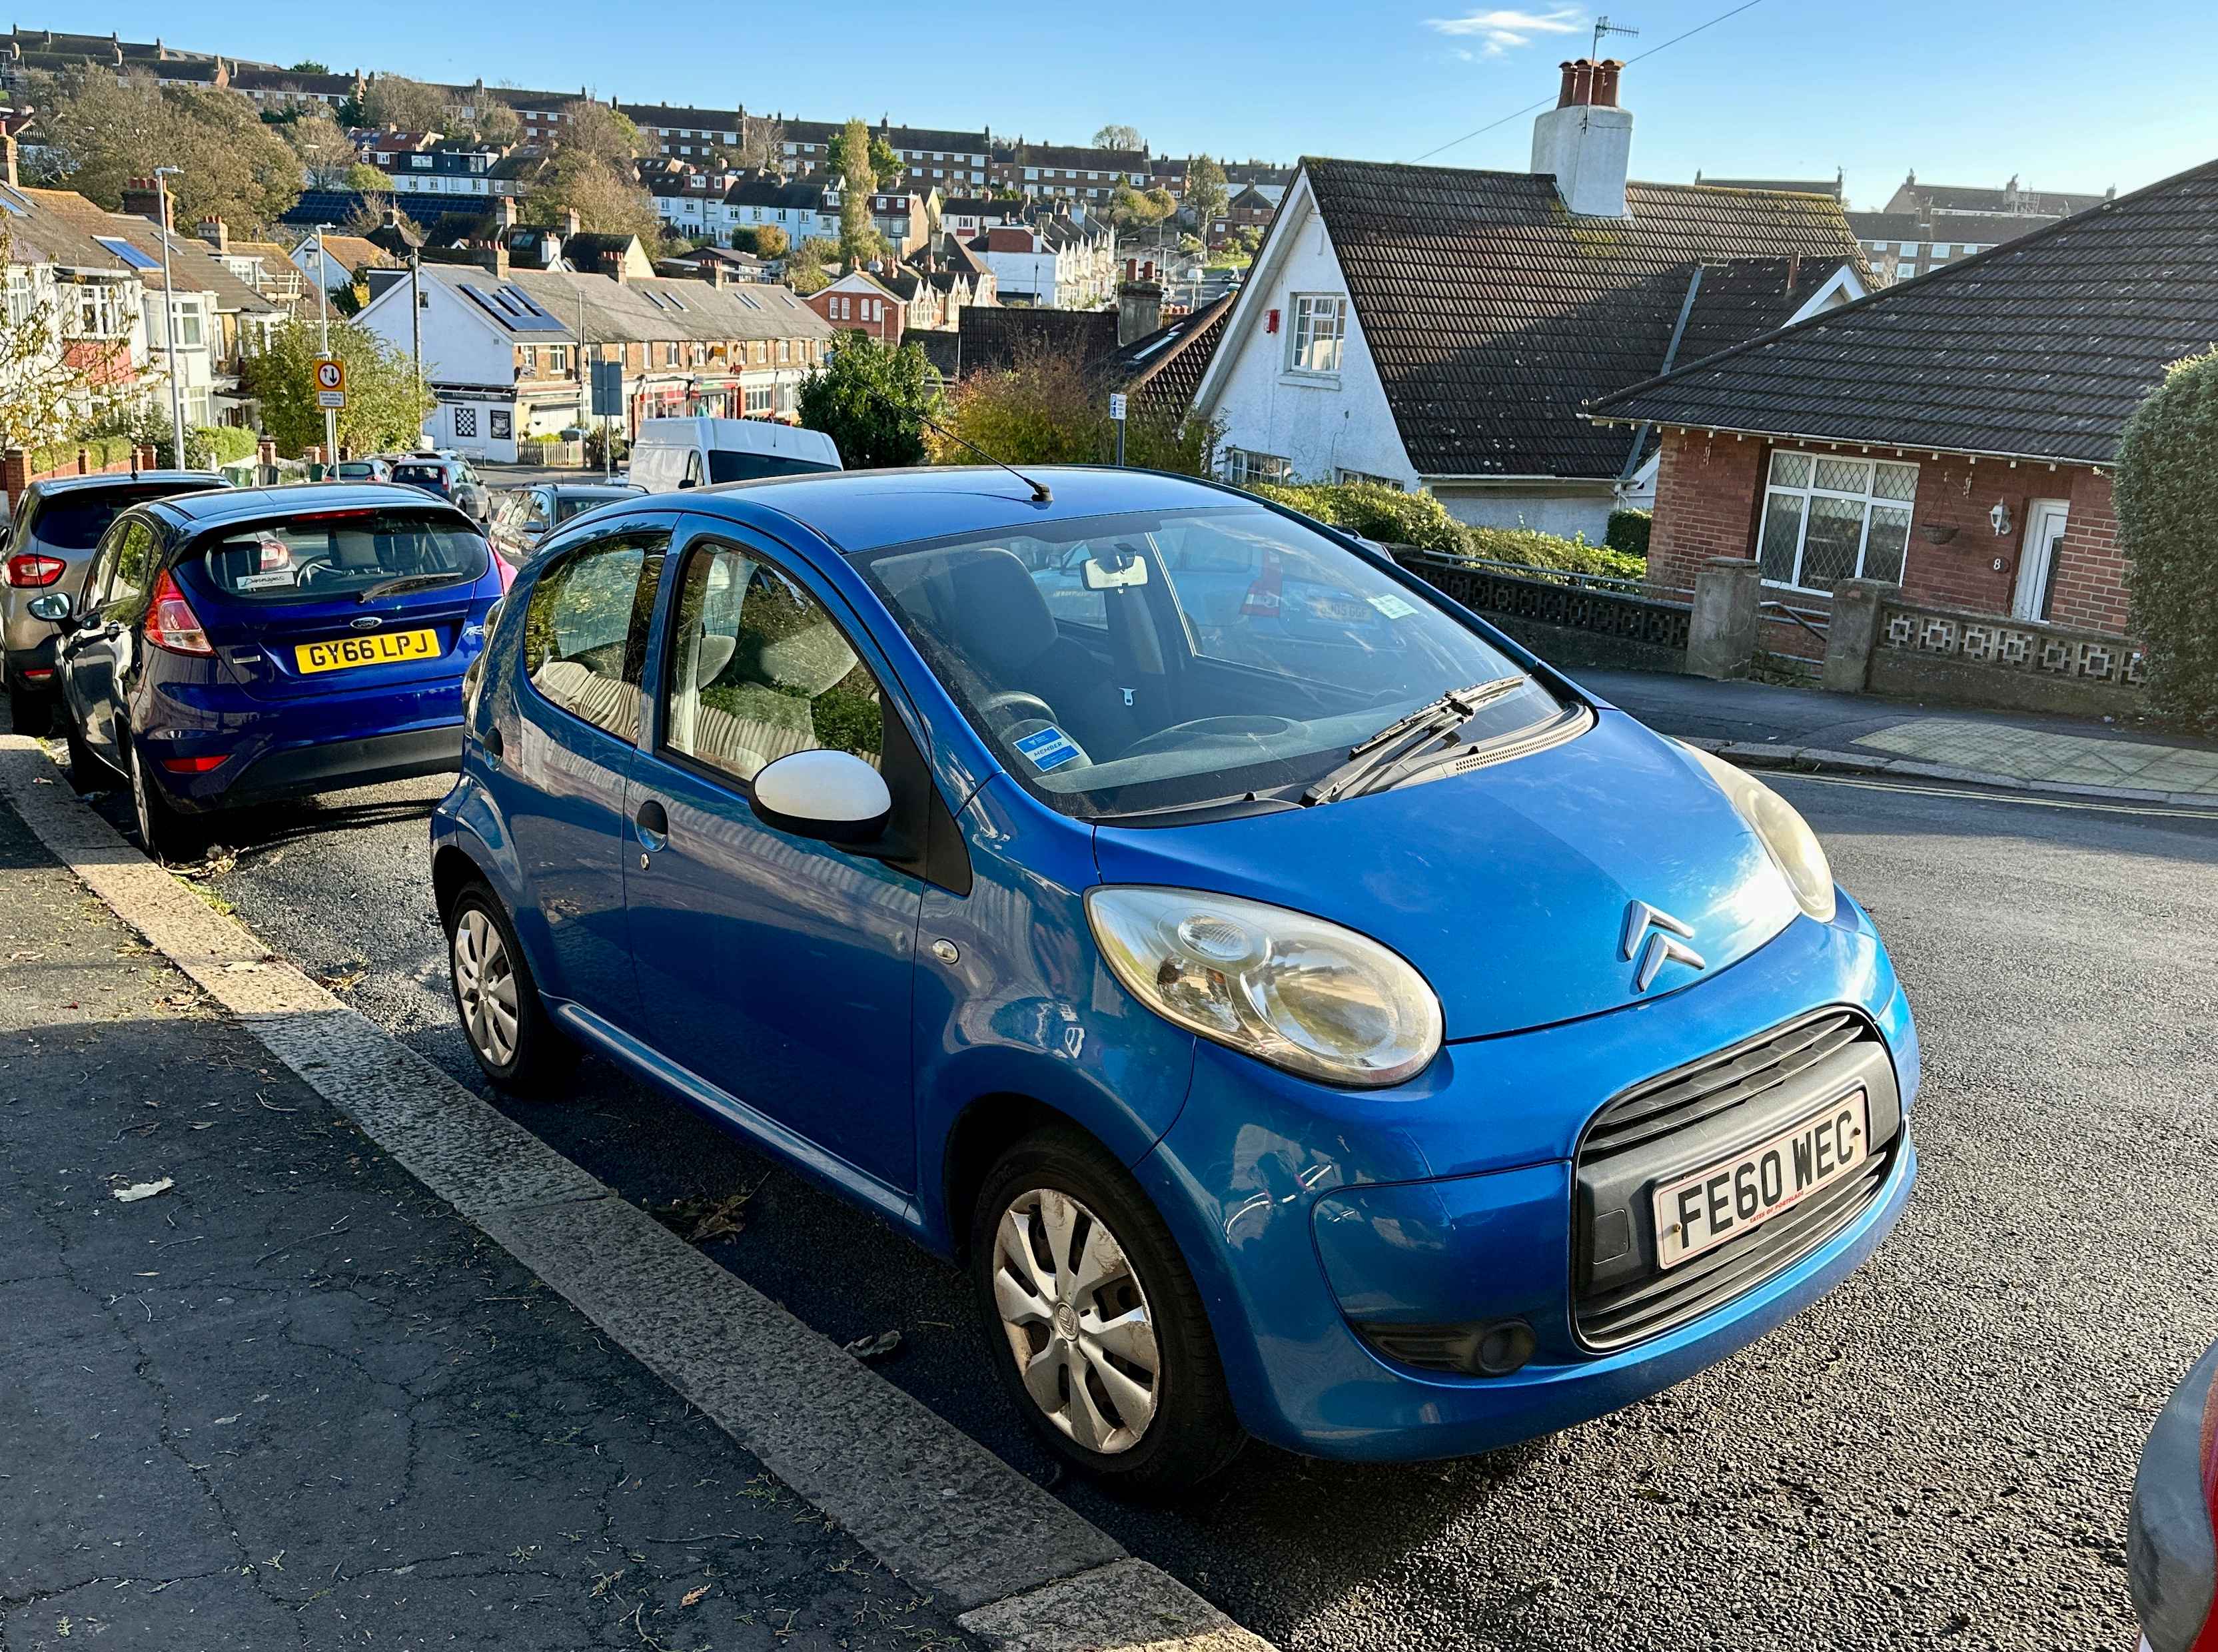 Photograph of FE60 WEC - a Blue Citroen C1 parked in Hollingdean by a non-resident. The fifth of ten photographs supplied by the residents of Hollingdean.